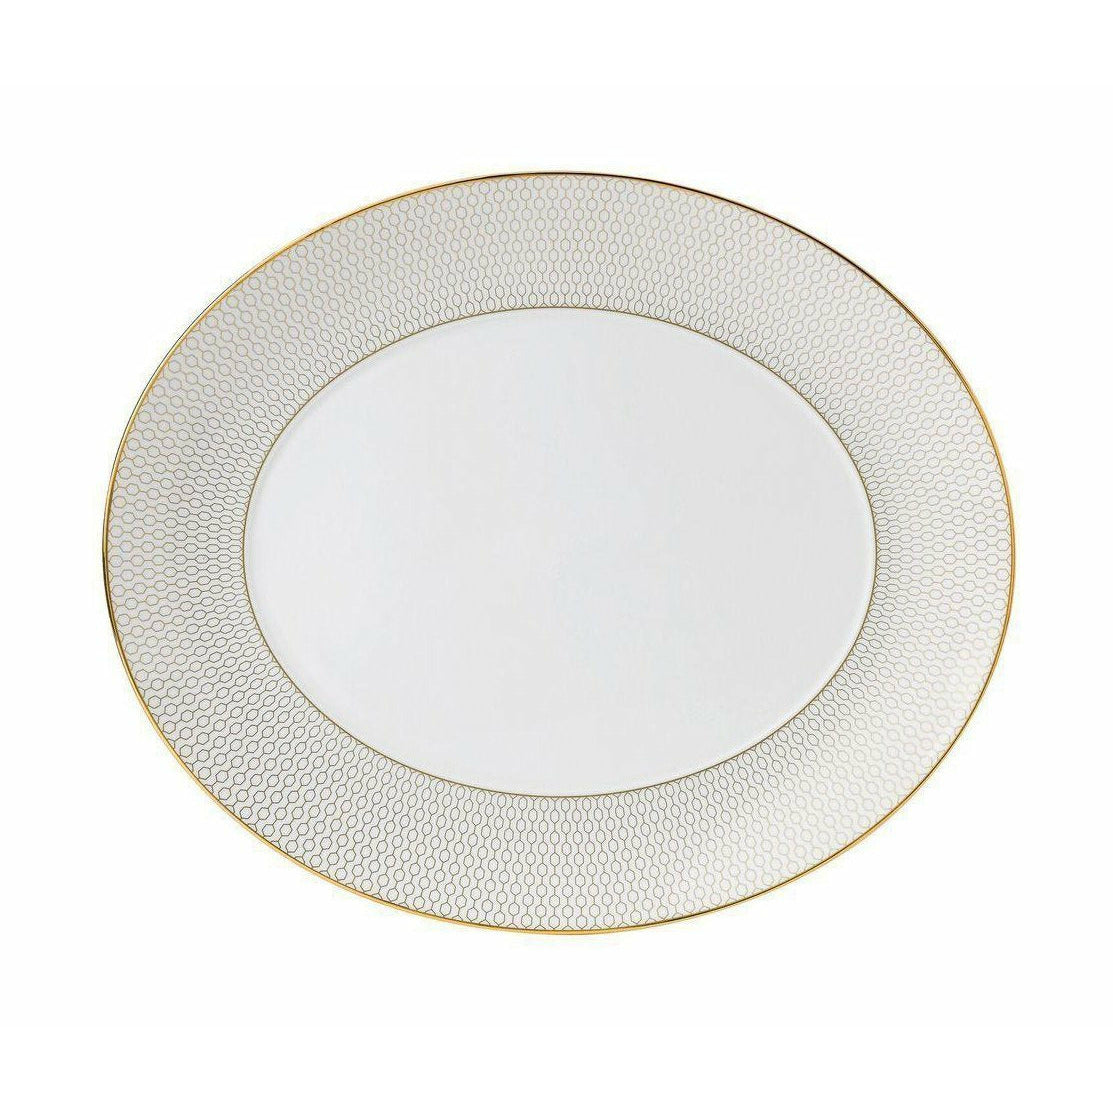 Wedgwood Arris Oval Serving Plate 33 Cm